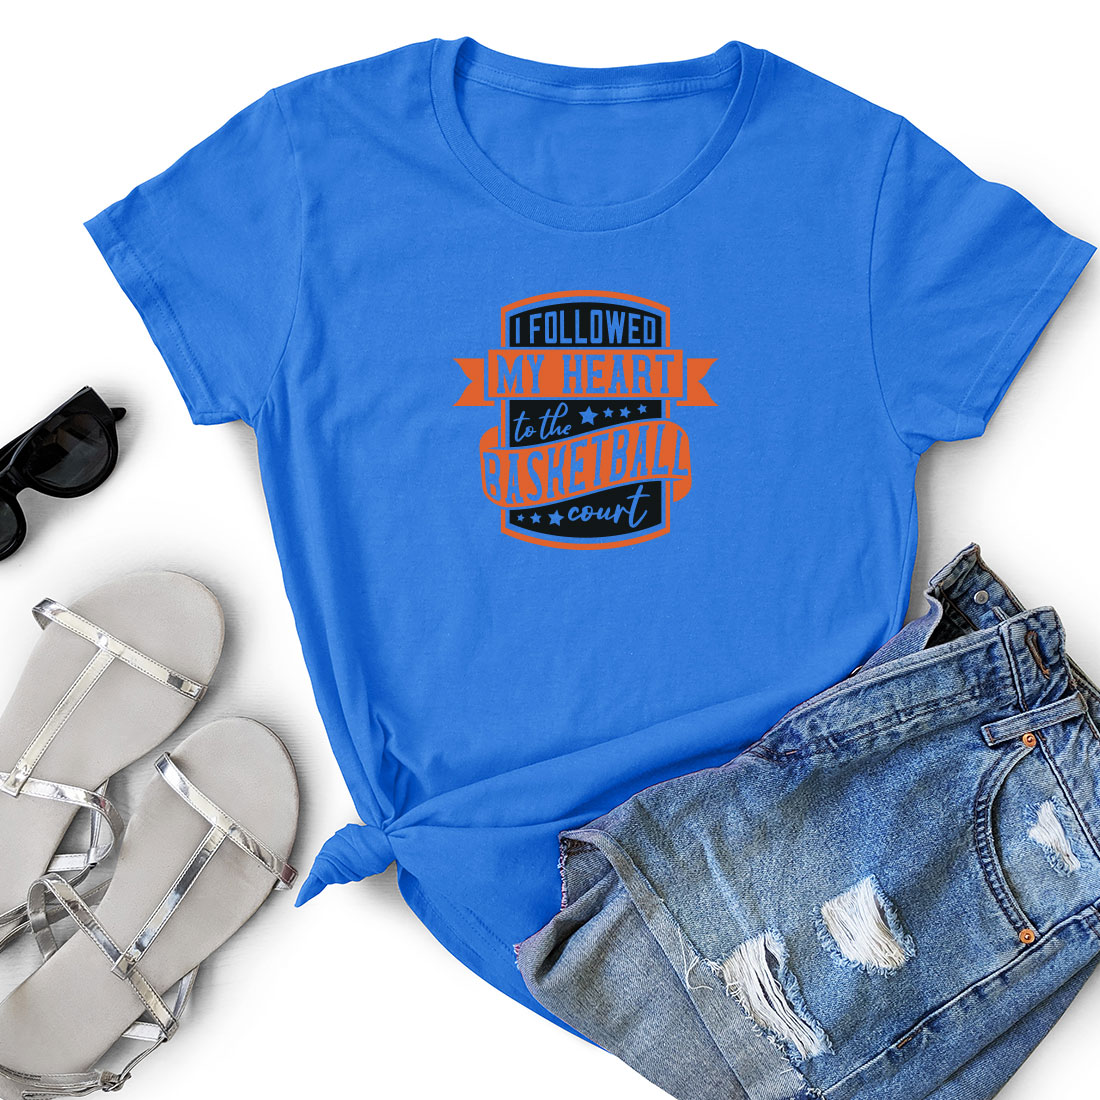 Women's blue shirt with an orange and black graphic on it.